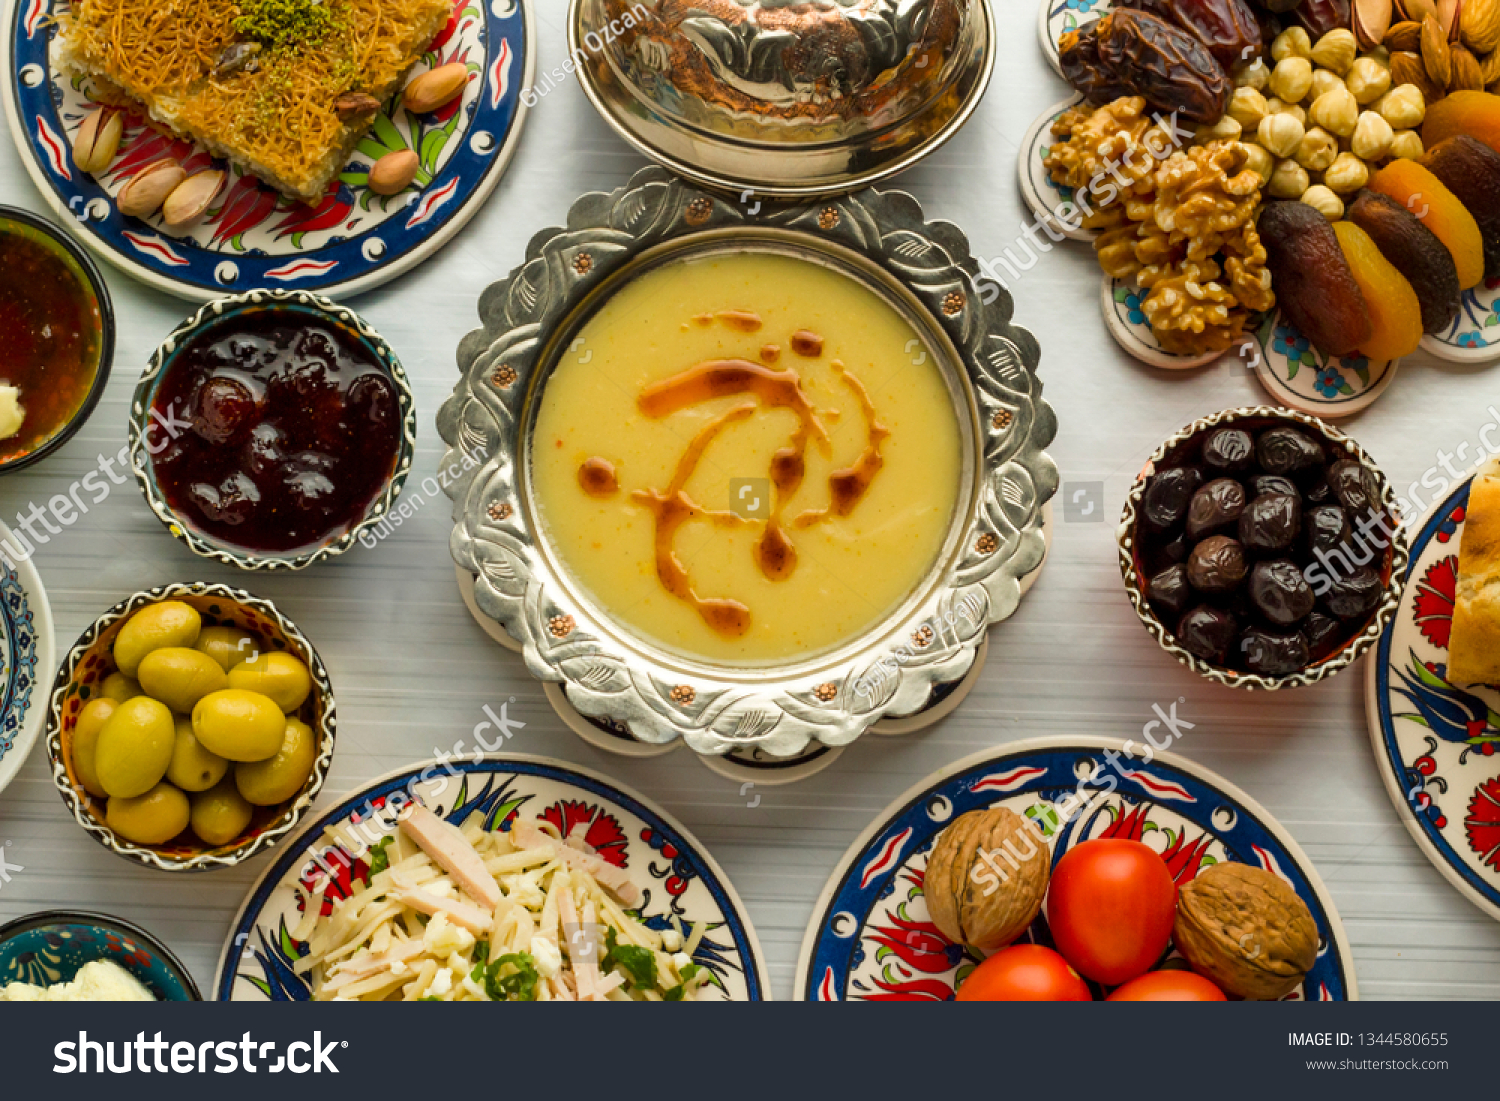 Traditional Turkish Ramadan,iftar meal table with lentil soup in vintage silver soup bowl on middle of table with other foods. #1344580655